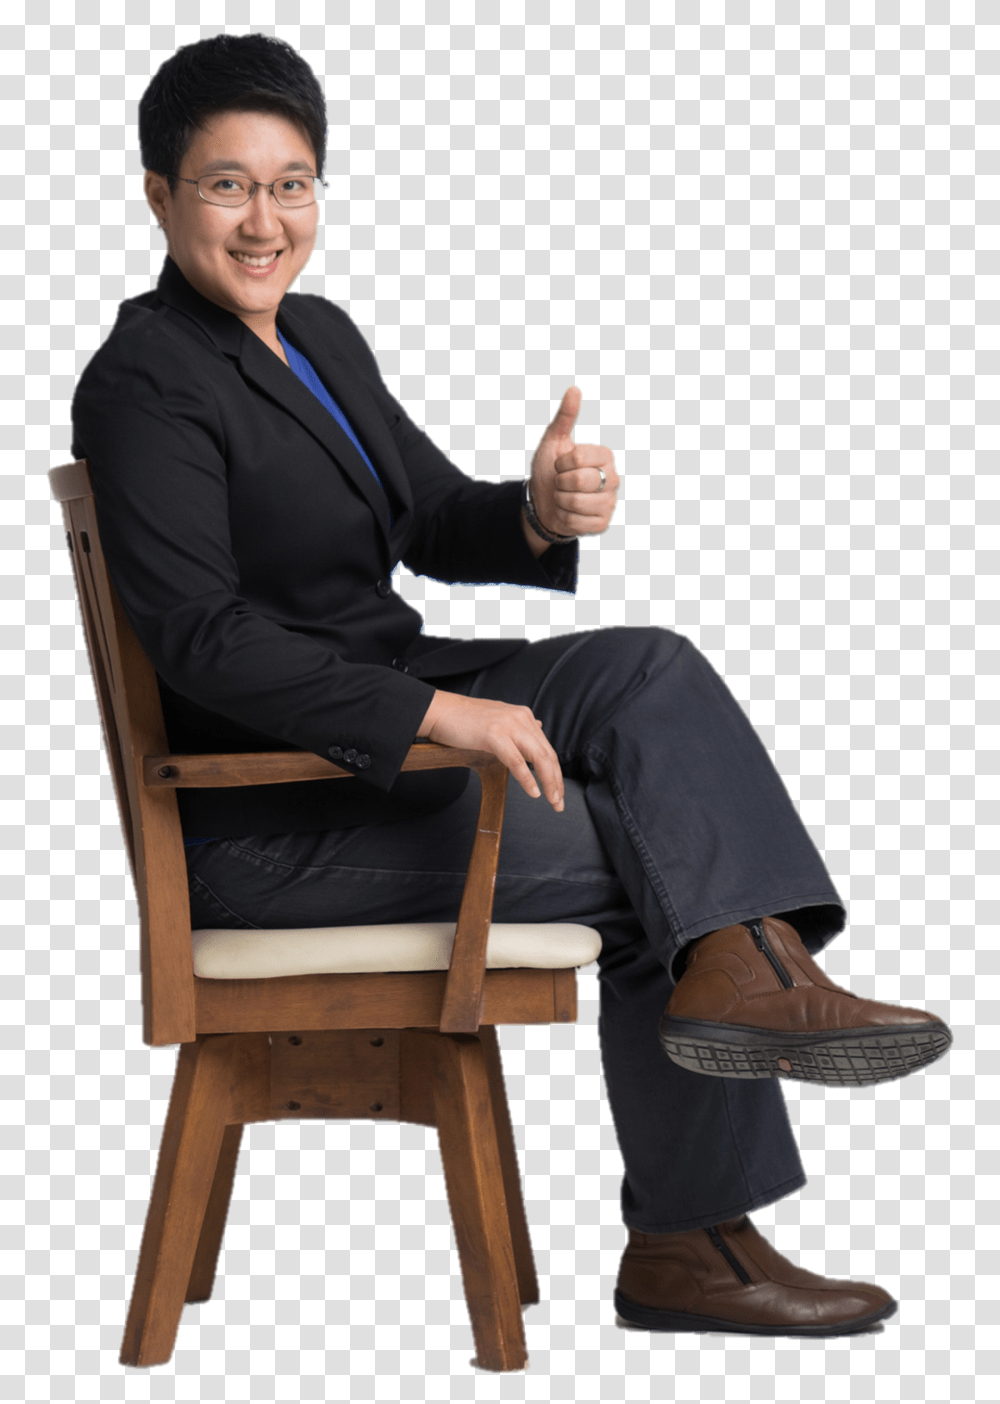 Person Sitting In Chair Maresa Ng On Chair Maresa Ng, Furniture, Human, Apparel Transparent Png